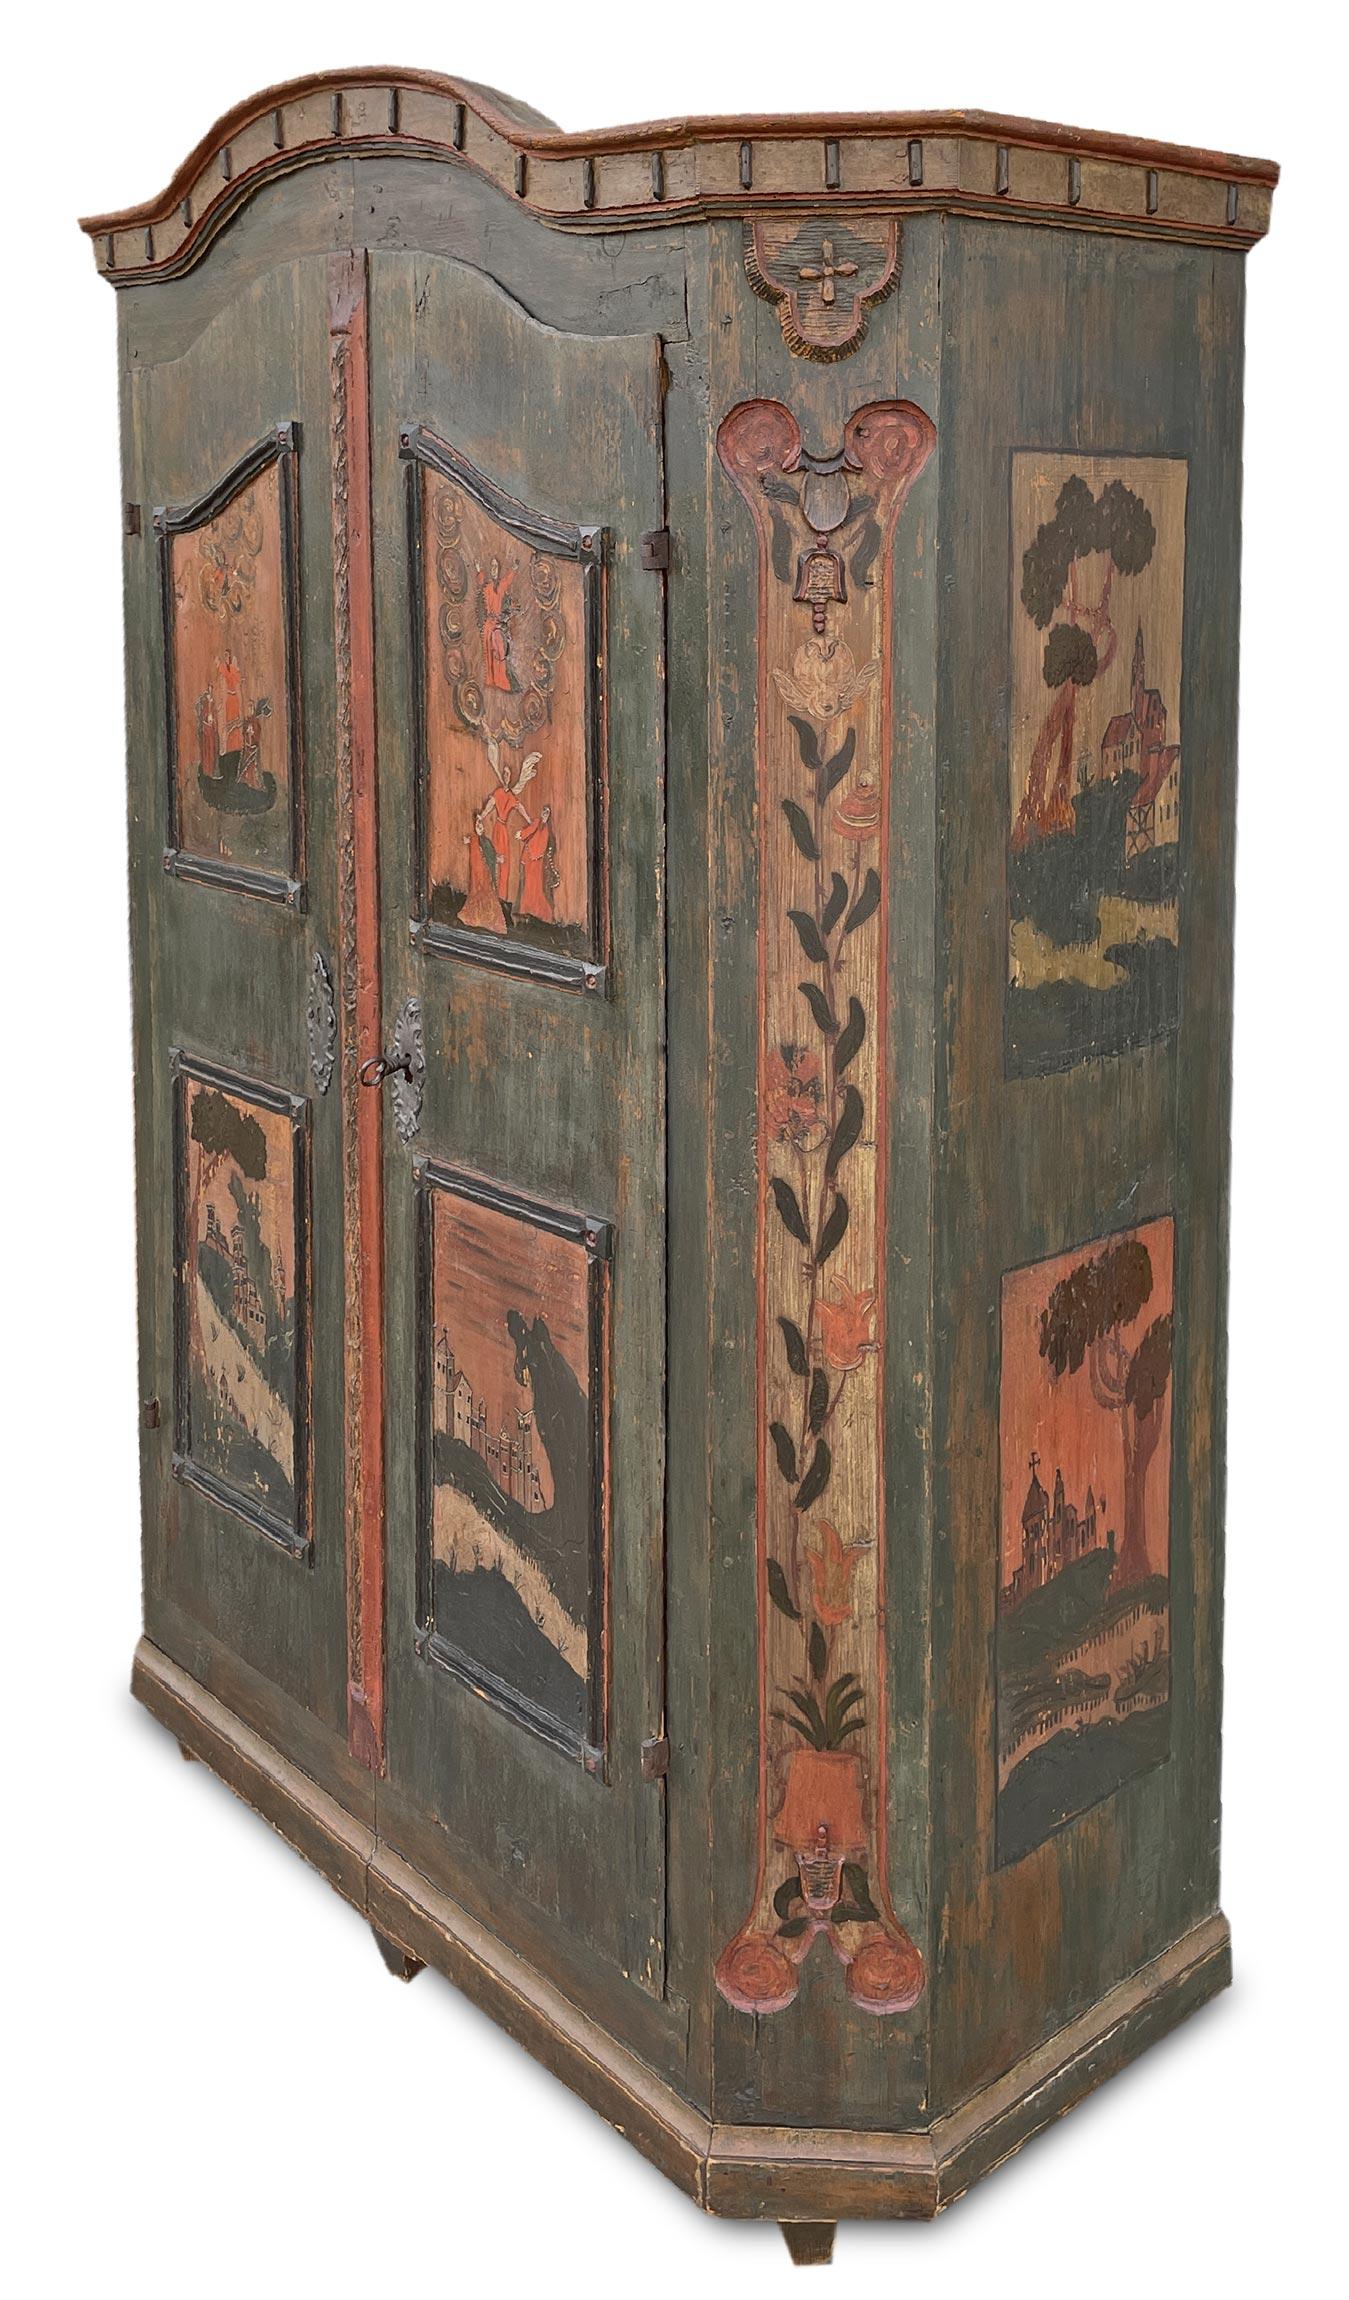 Rustic Late 18th Century Green Painted Cabinet